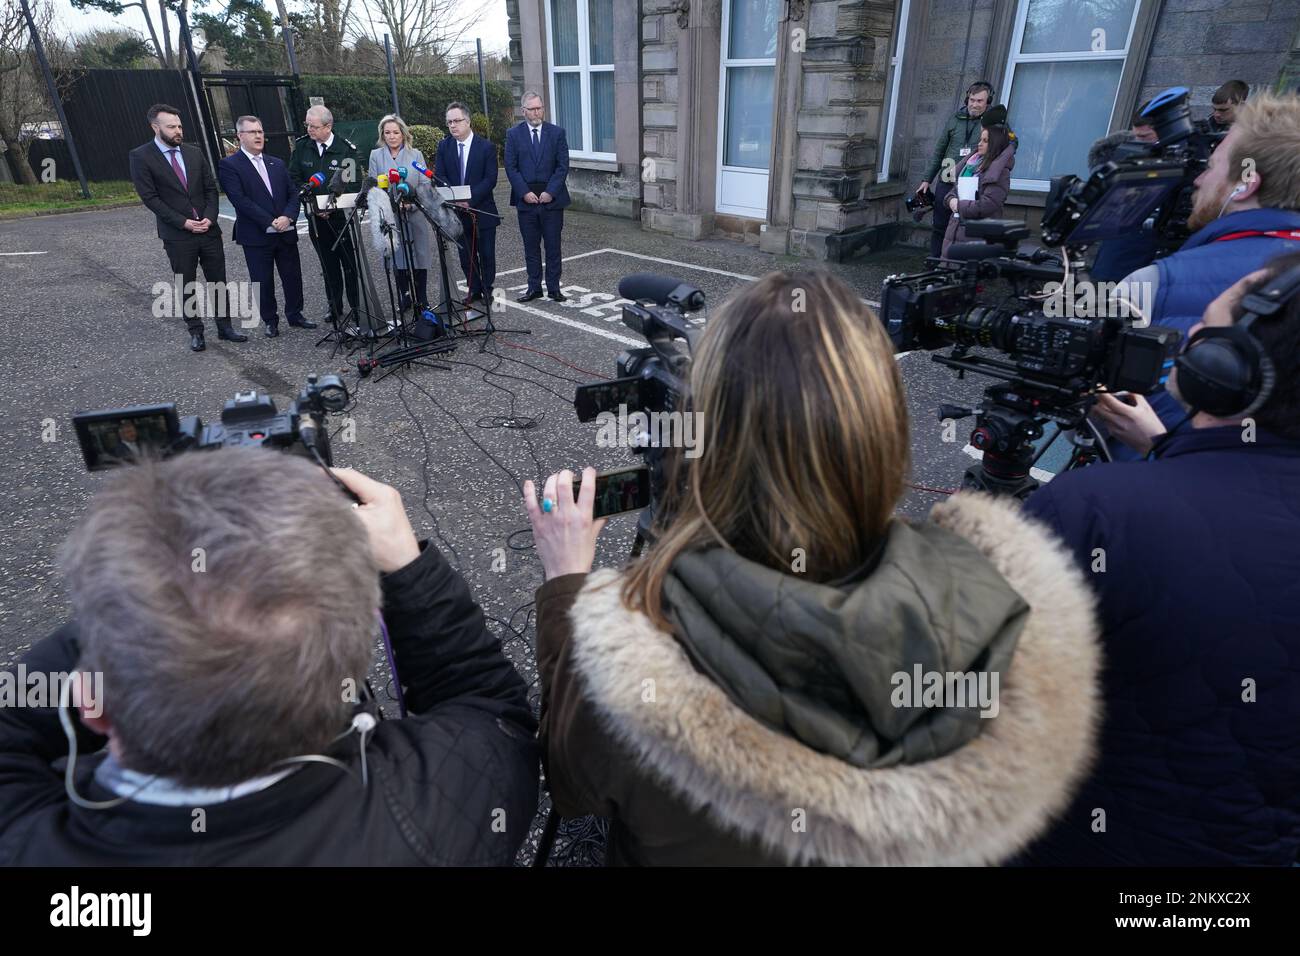 (left to right) SDLP leader Colum Eastwood, DUP leader Jeffrey Donaldson, Police Service of Northern Ireland (PSNI) Chief Constable Simon Byrne, Sinn Fein deputy leader Michelle O'Neill, Ulster Unionist Party (UUP) leader Doug Beattie, and Alliance party member Stephen Farry speaking to the media outside the PSNI HQ in Belfast, where they are meeting following the shooting of PSNI Detective Chief Inspector John Caldwell on Wednesday. Picture date: Friday February 24, 2023. Stock Photo